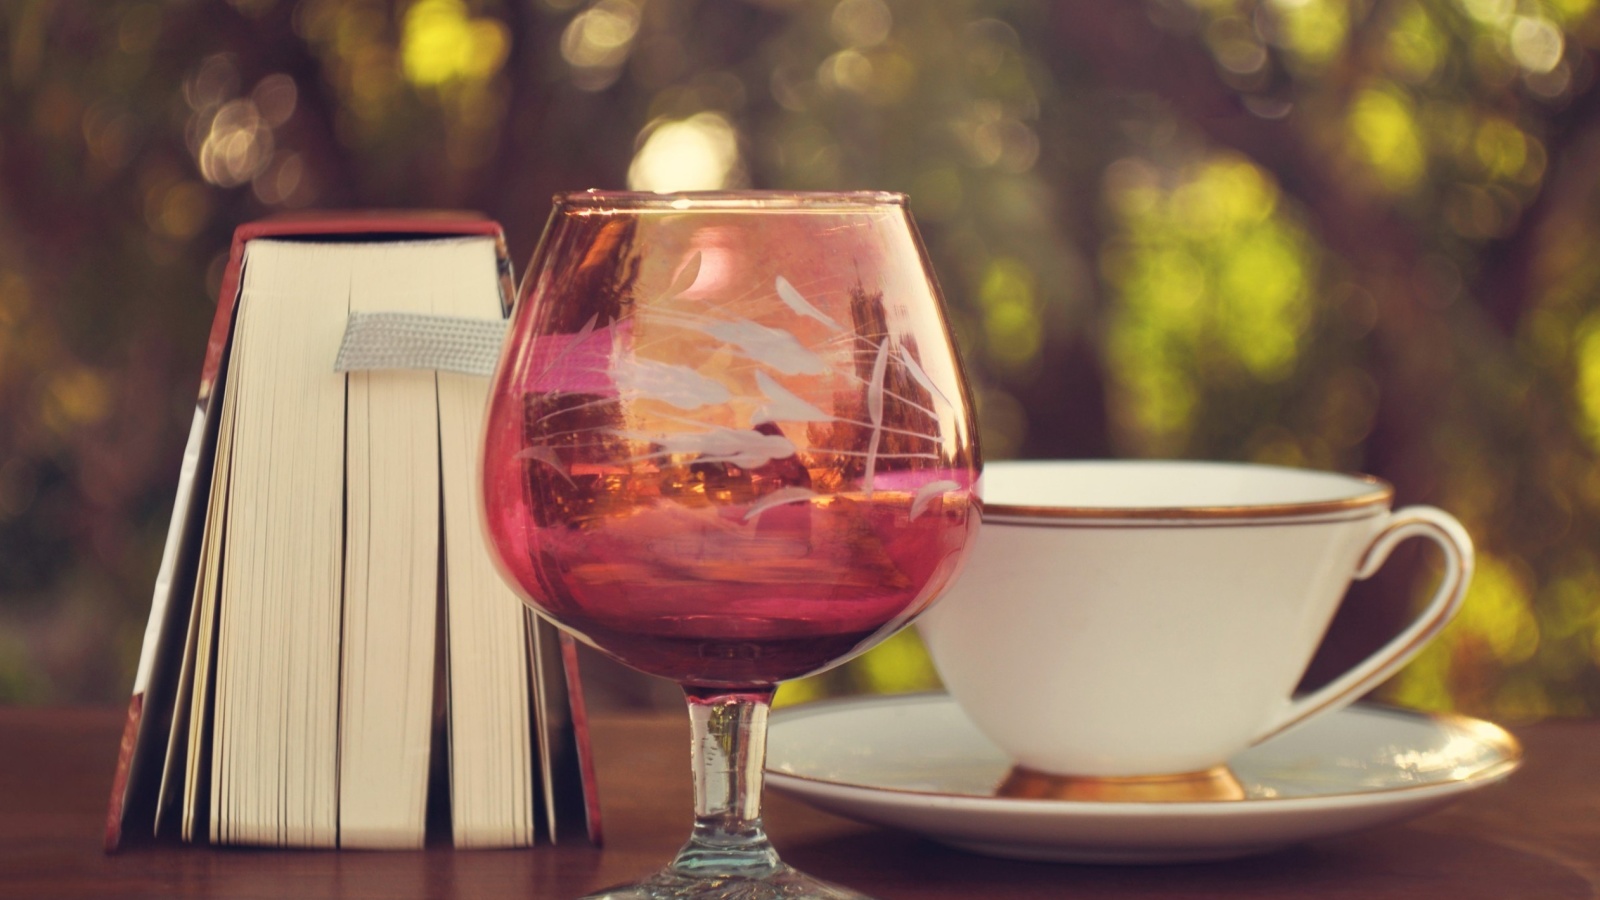 Perfect day with wine and book screenshot #1 1600x900